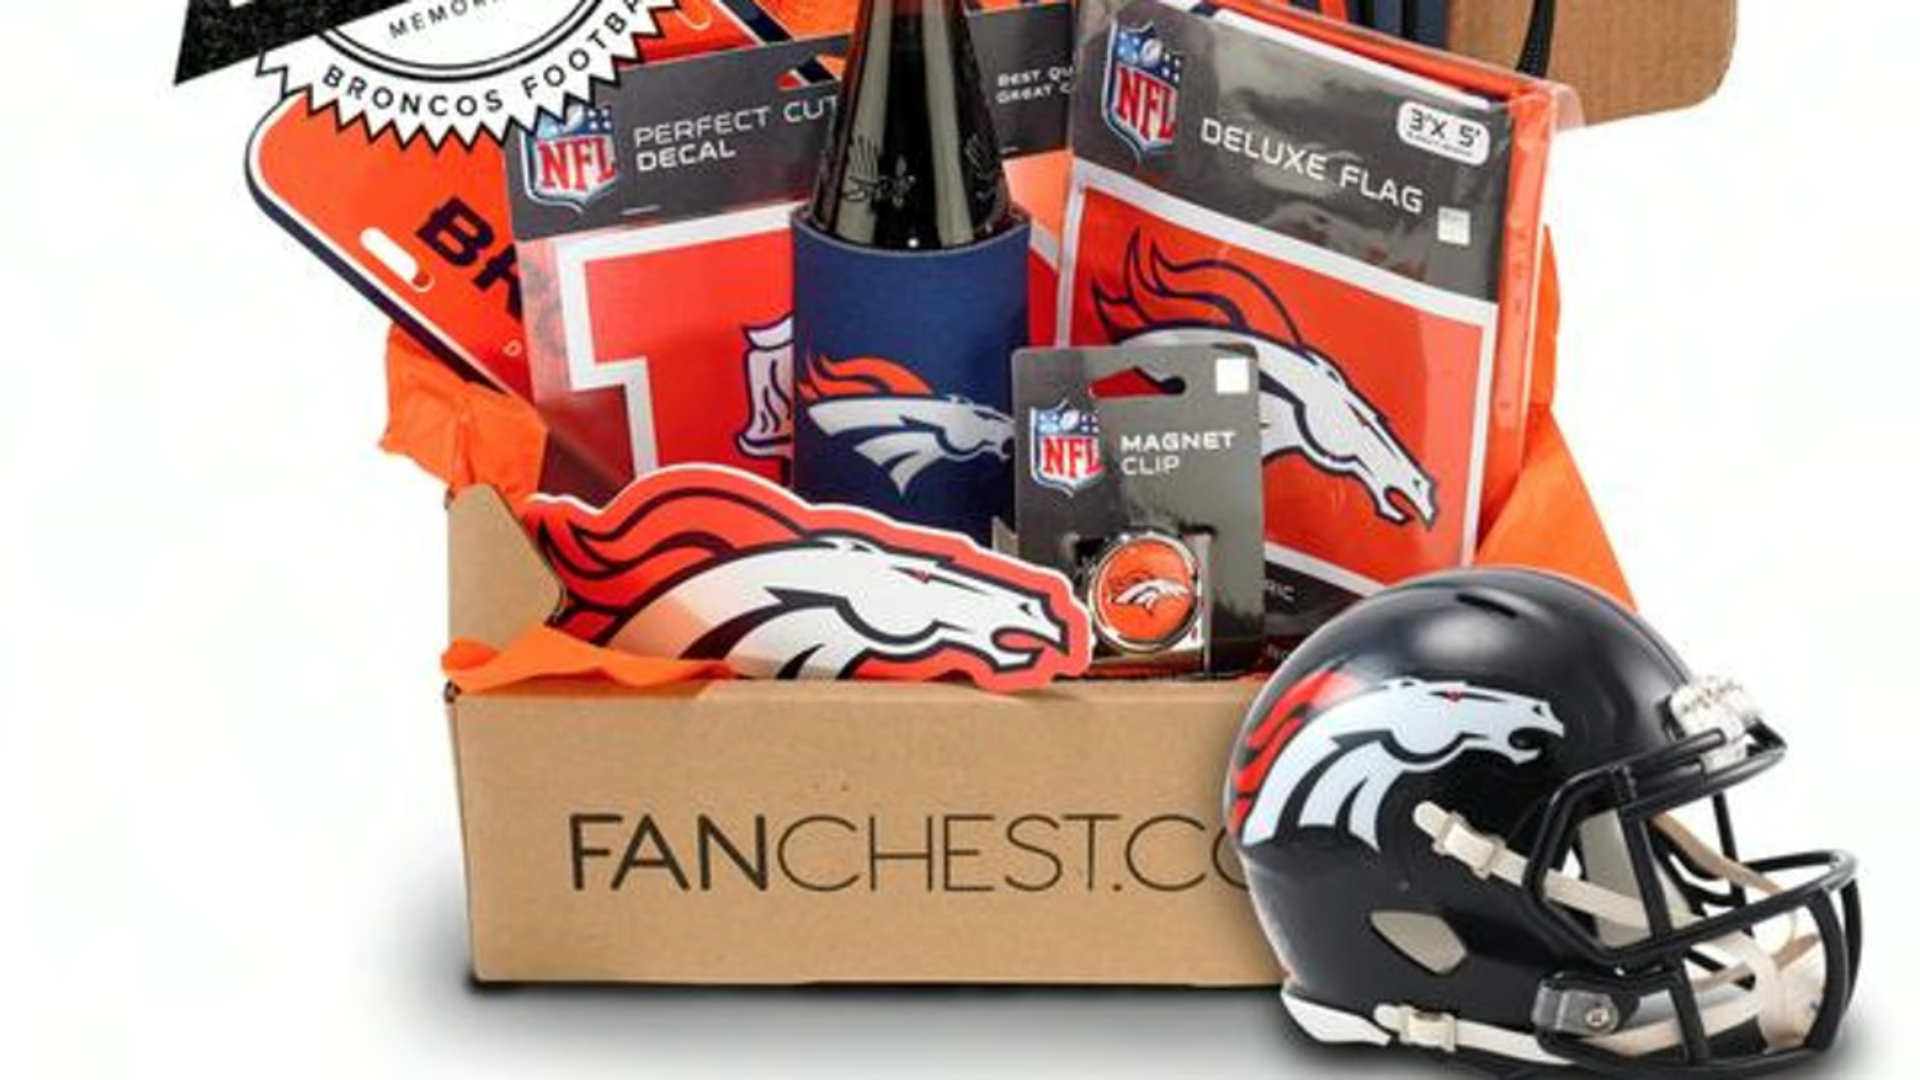 A Denver Broncos Fanchest is the perfect holiday gift